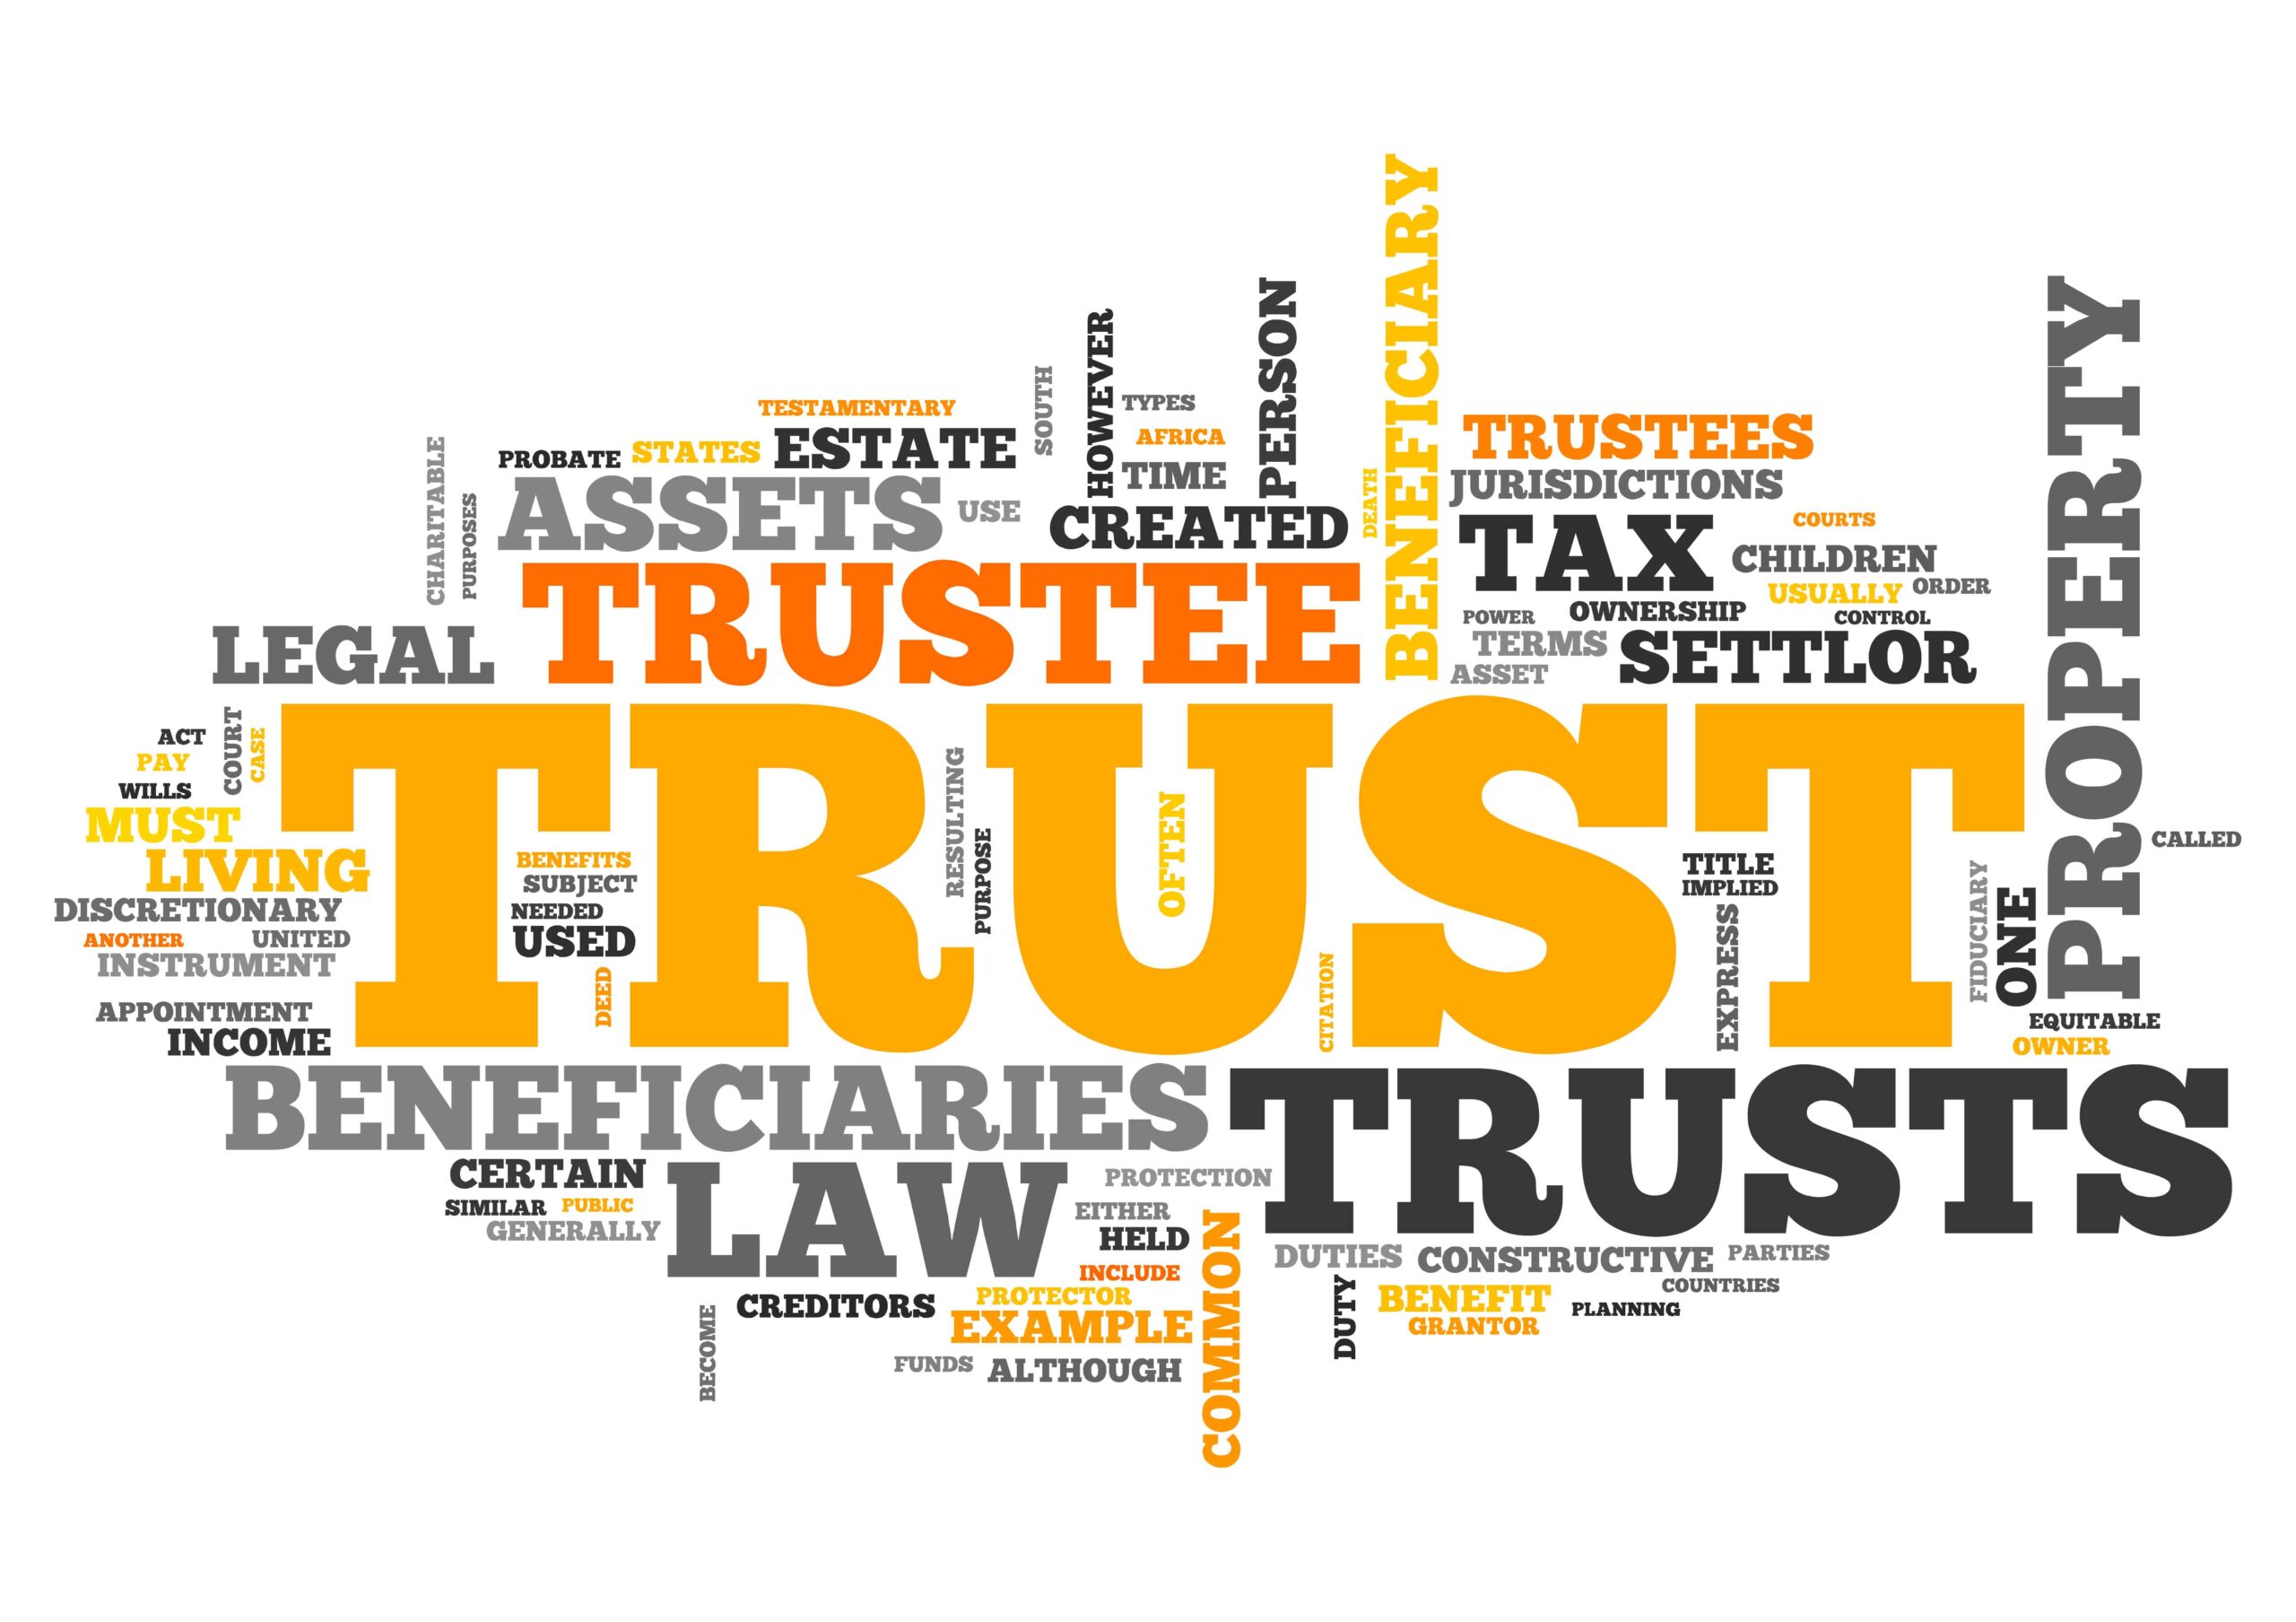 The role of a trustee